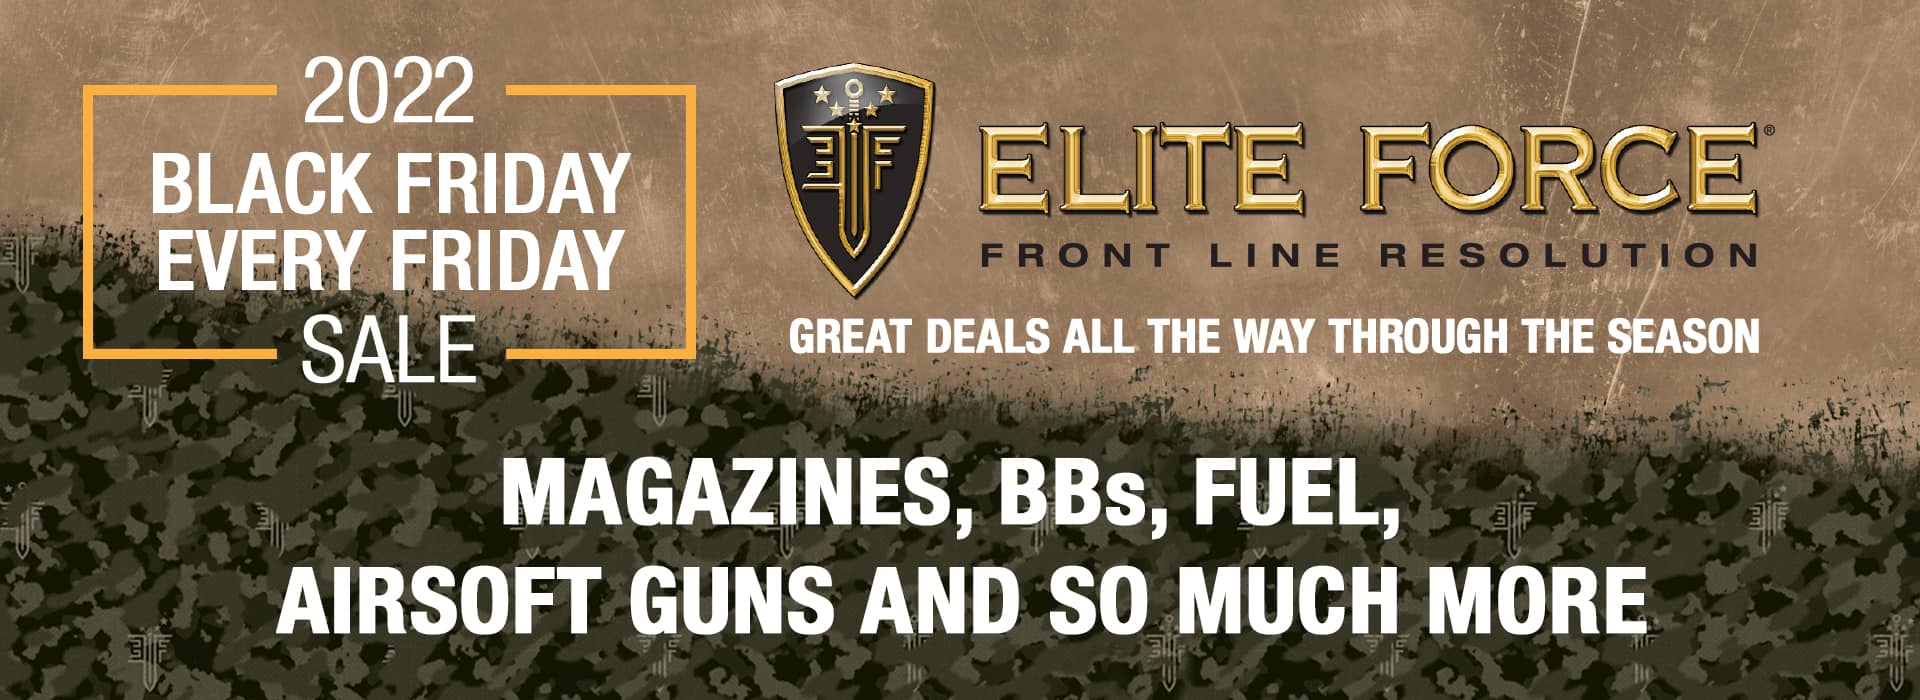 Black Friday Every Friday! Great Deals all the way through the season. Magazines, BBs, Fuel, Airsoft Guns and so much more.